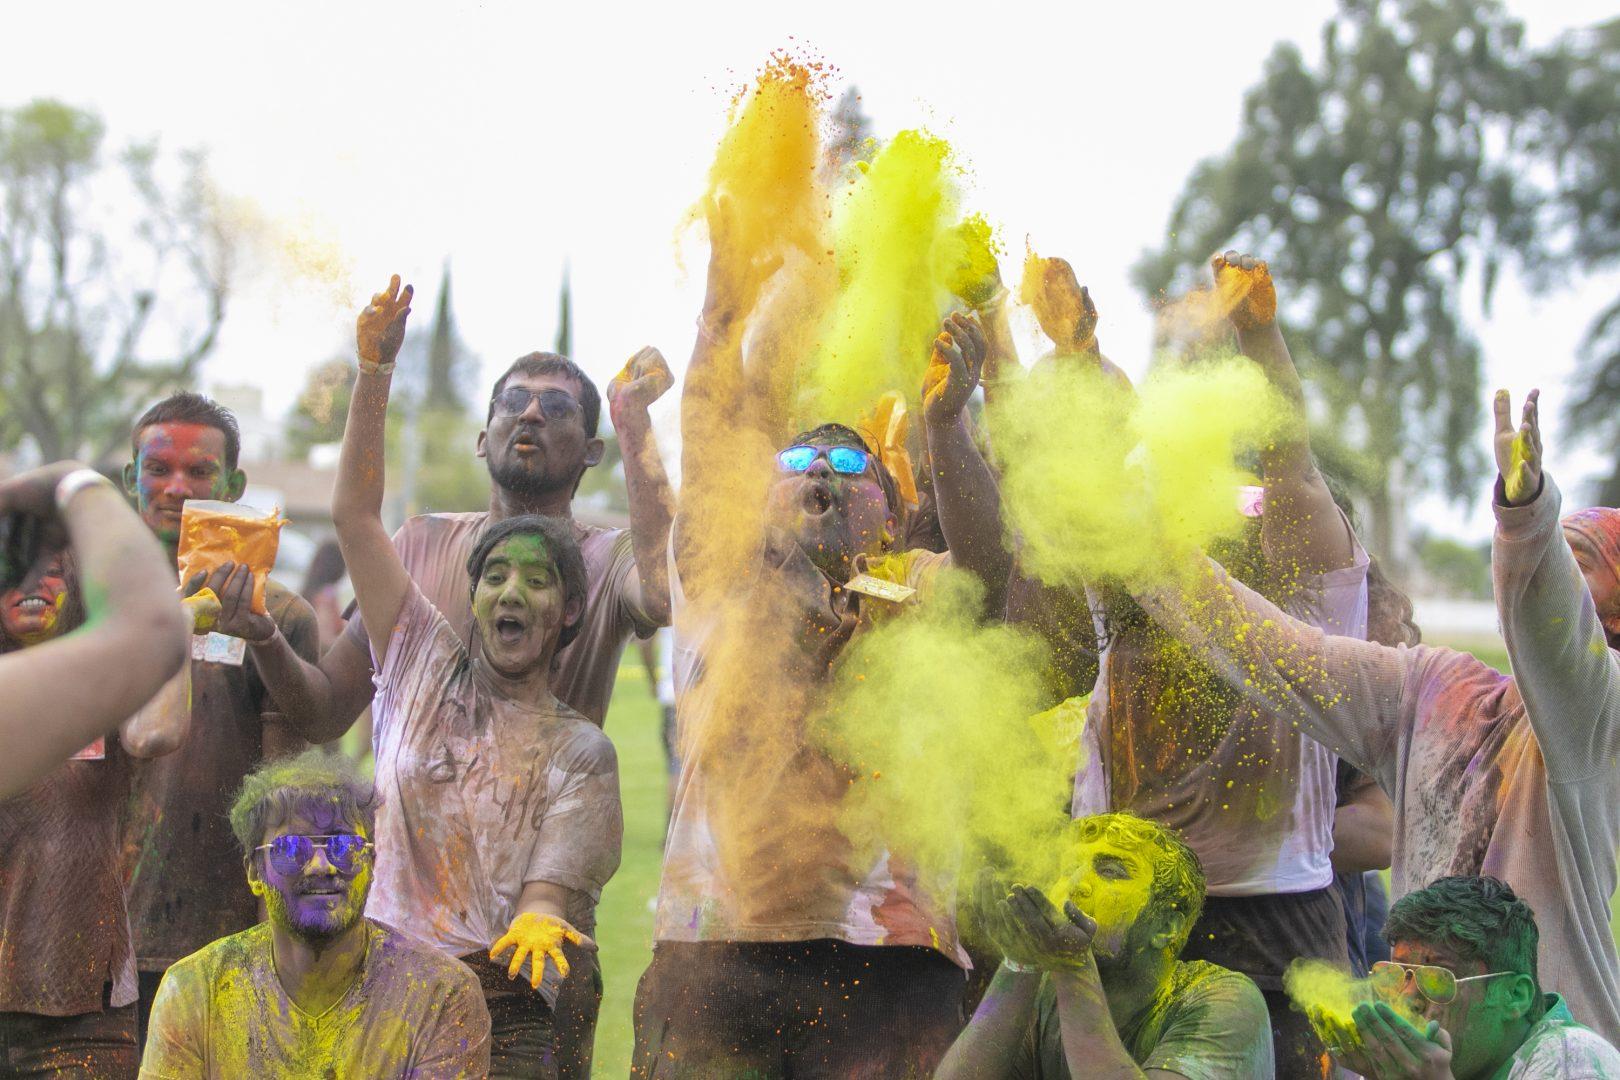 Students from Fresno States Indian Student Club throw colored powder as part of the Holi Festival Party at J.E. ONeill Park on March 22, 2019. (Larry Valenzuela/The Collegian)